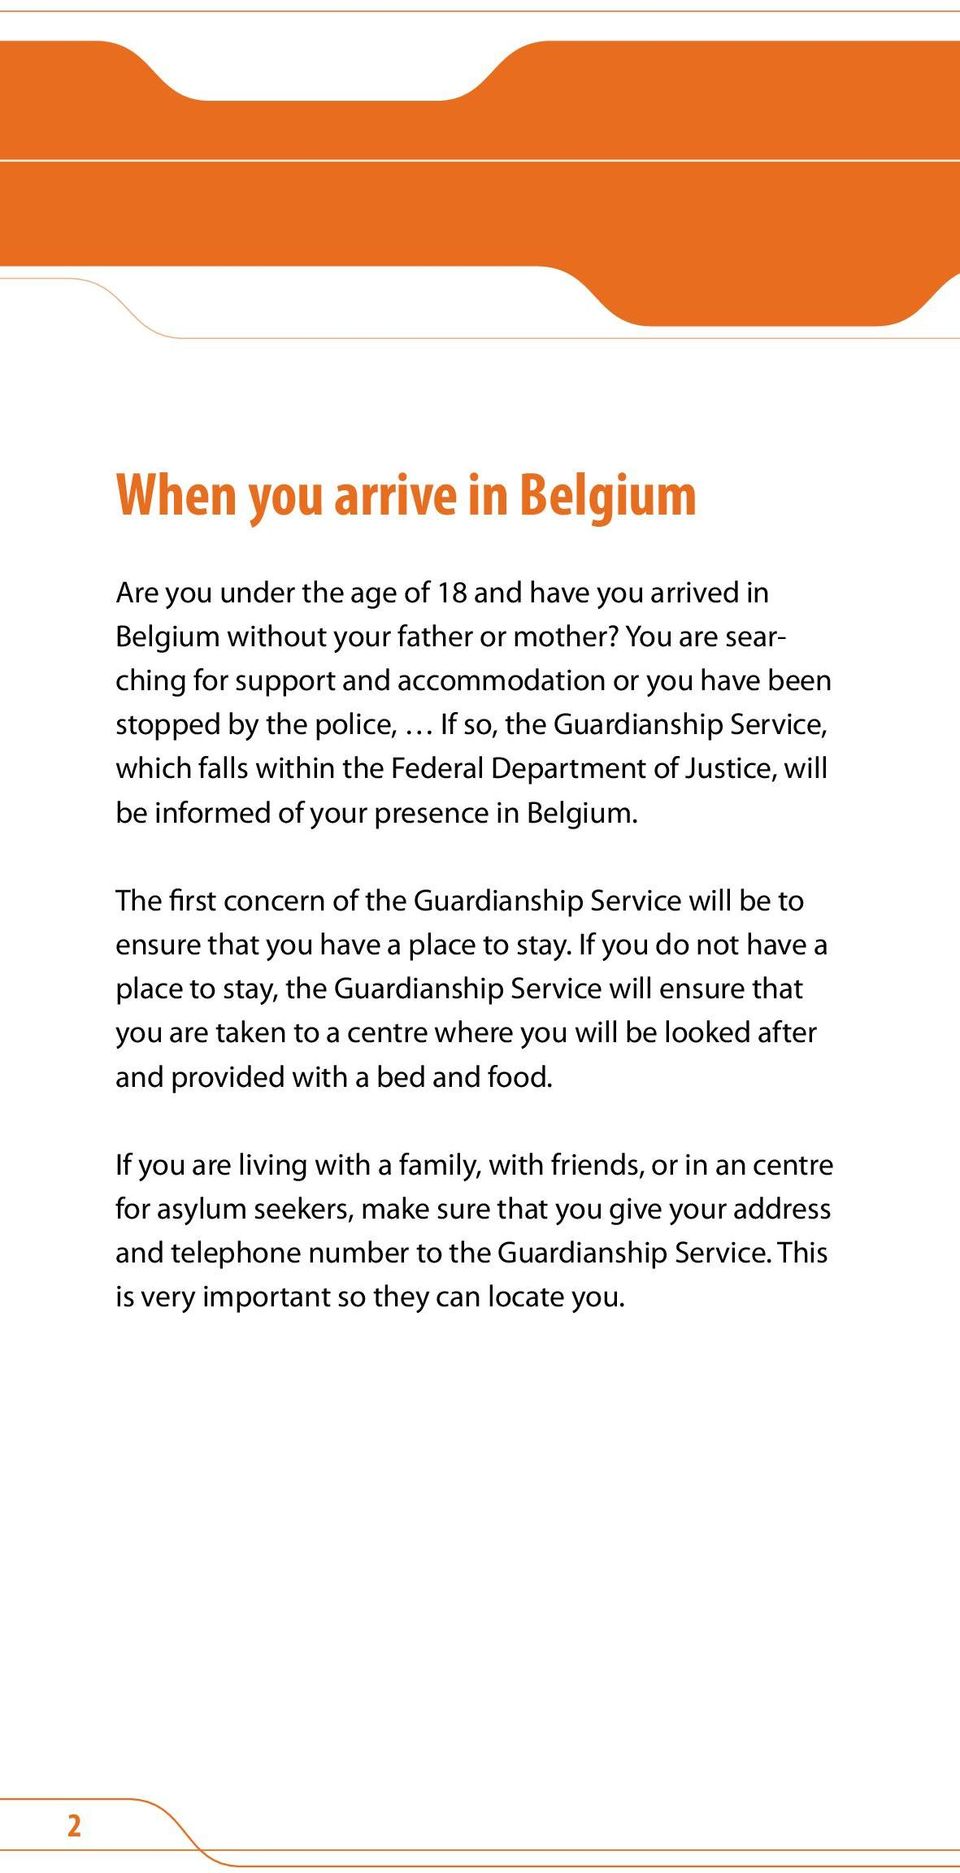 presence in Belgium. The first concern of the Guardianship Service will be to ensure that you have a place to stay.